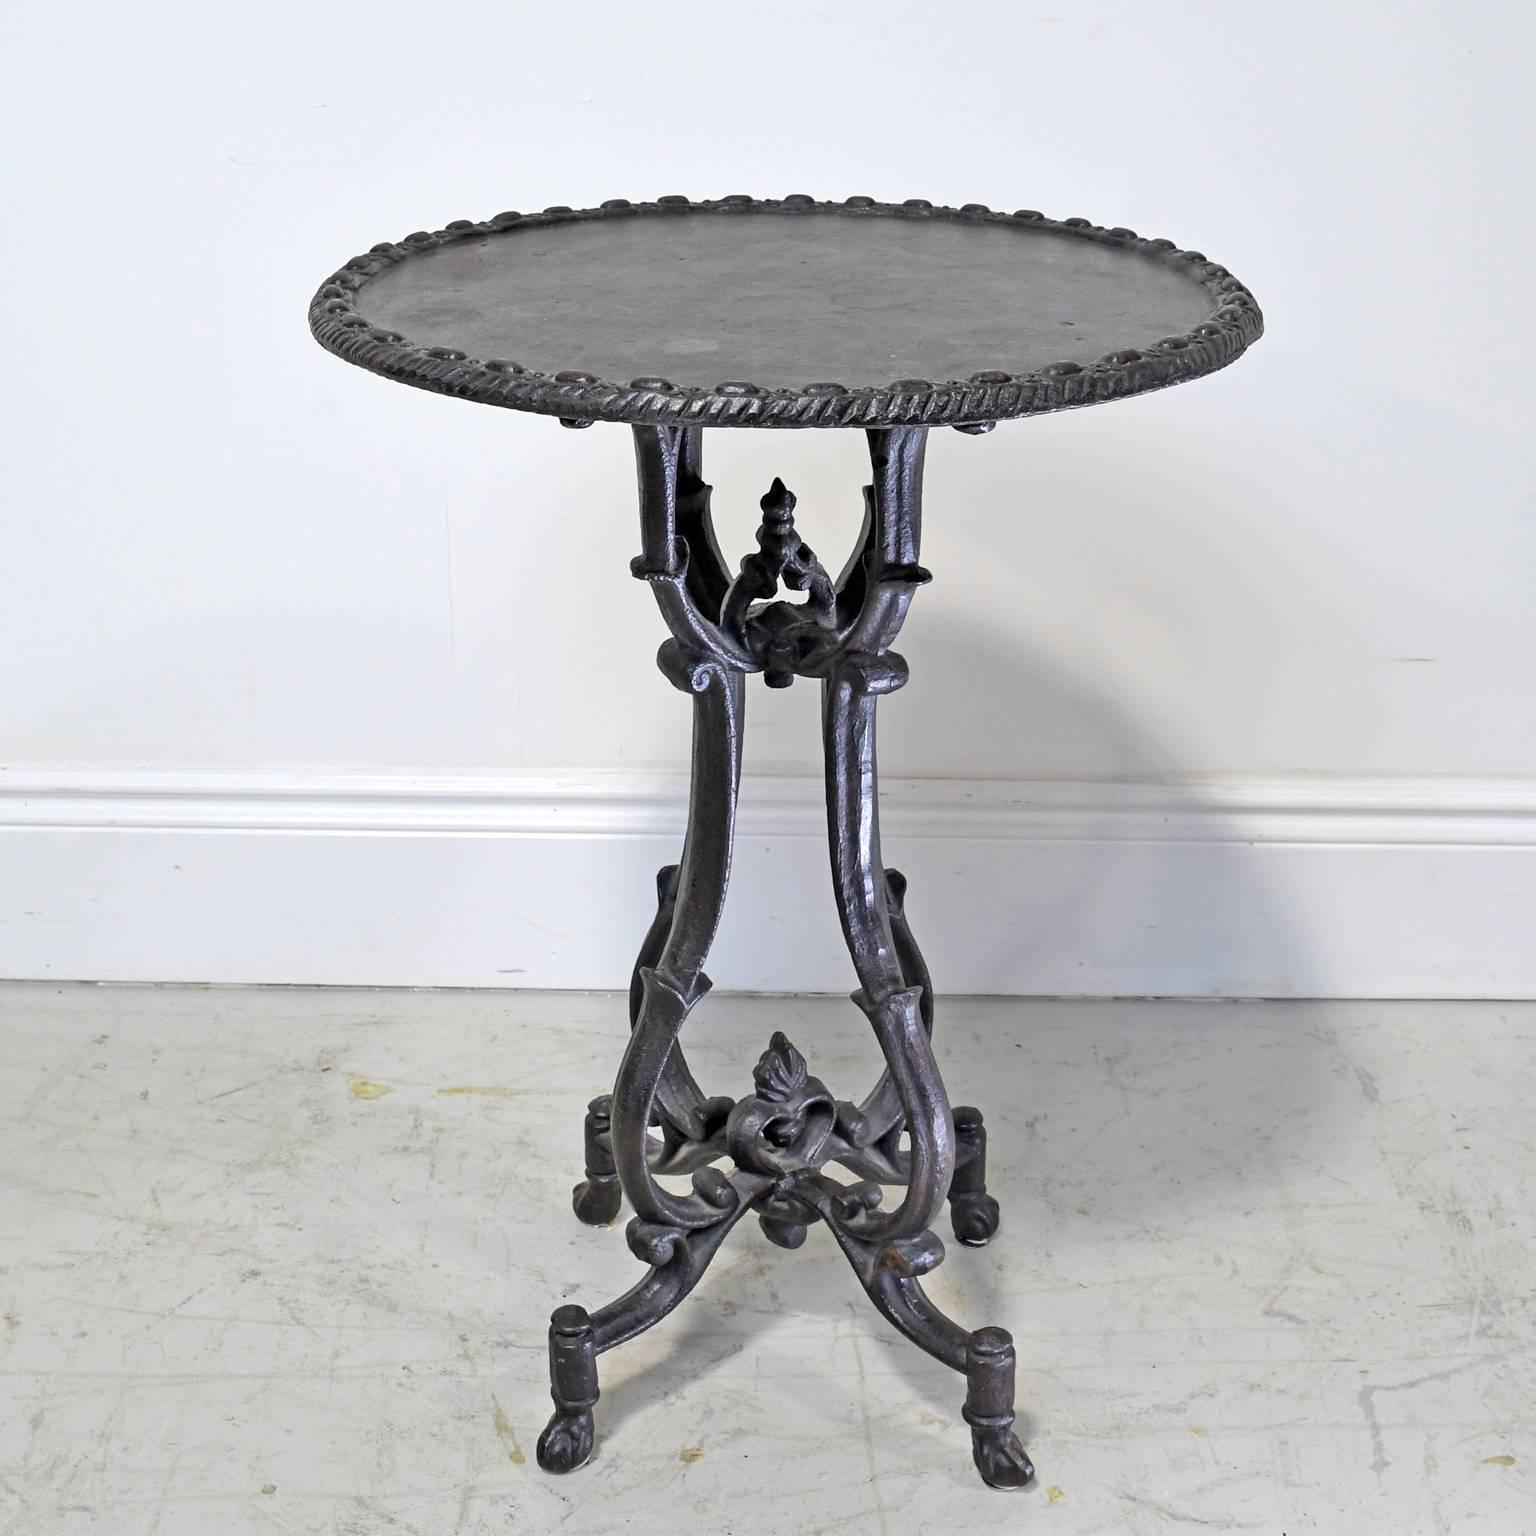 A vintage cast iron garden or bistro table that could also be used as a Stand or end table, with gadrooning along the round top and resting on a cage-shaped base that terminates with four ball-and-claw feet. Color is grey/black gun metal.
